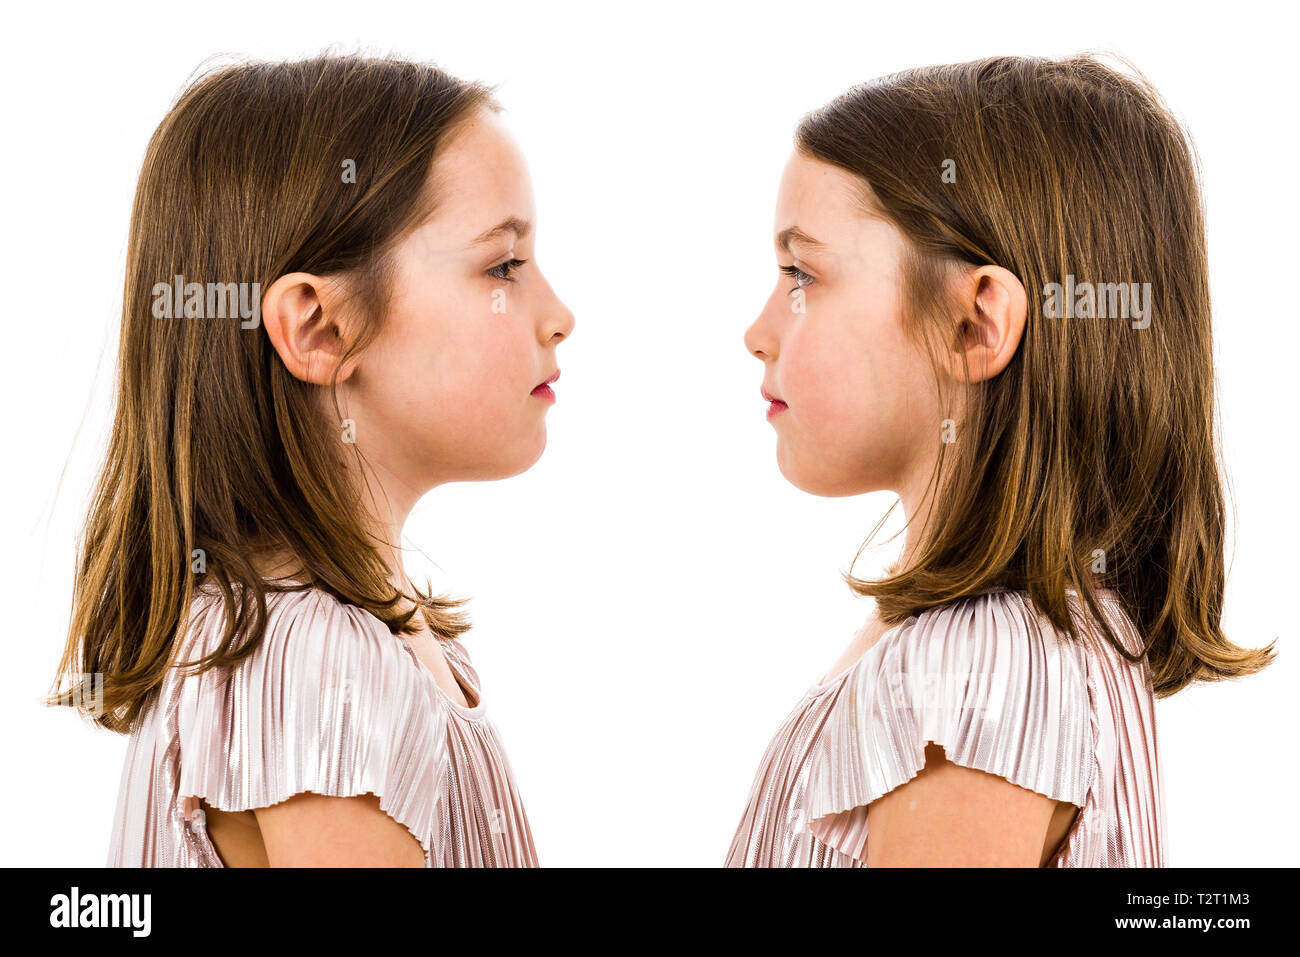 Identical twin girls are looking at each other being serious. Concept of family and sisterly love. Profile side view of identical twin sisters looking Stock Photo